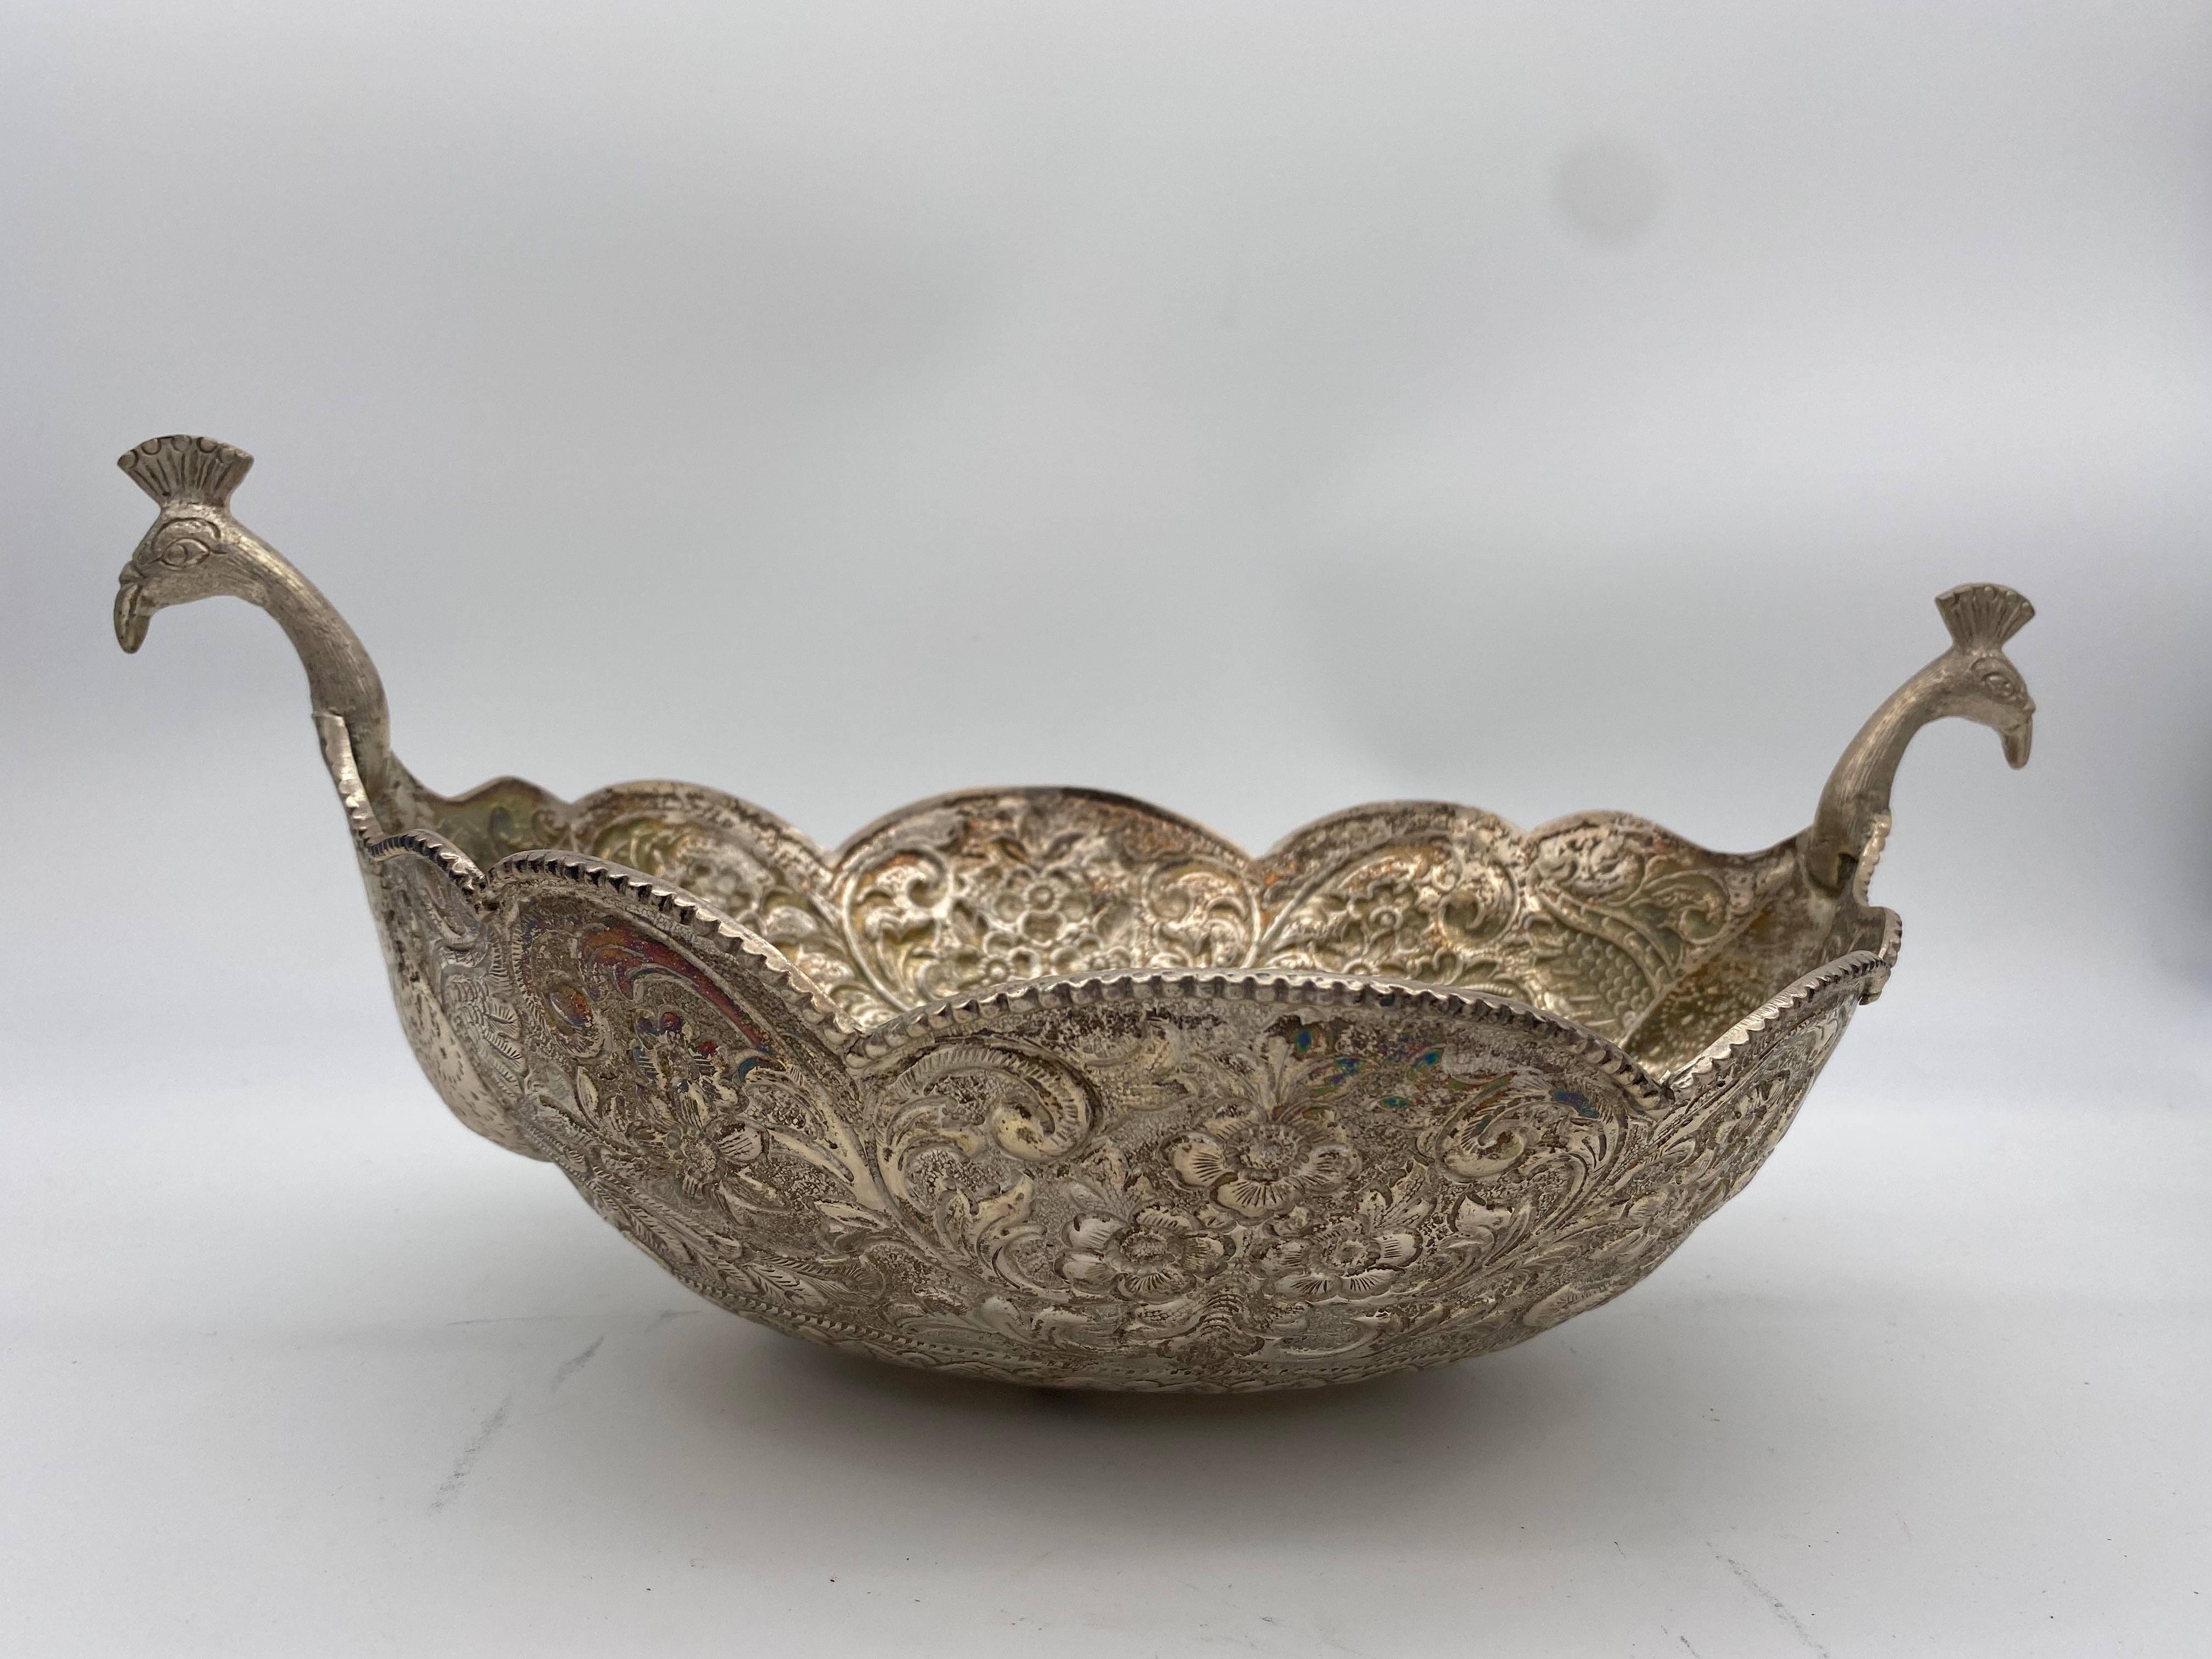 Antique silver oval serving bowl with peacock handles. Weighs 816 grams.